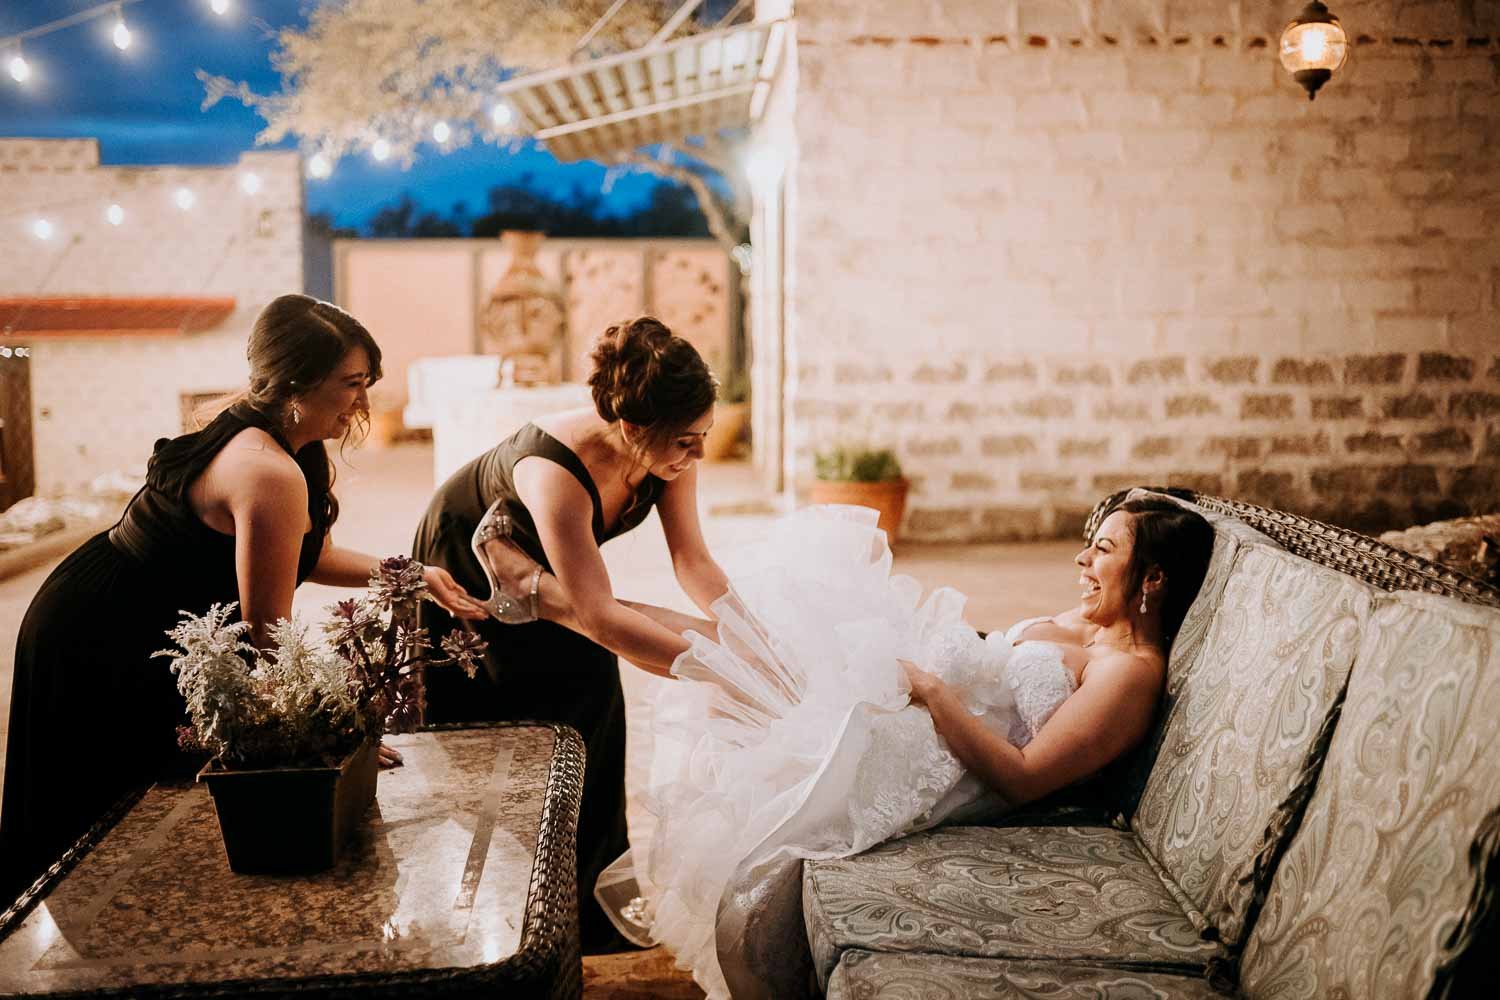 My favorite wedding images of 2019 - Mother and sister help adjust a brides garter in a humorous moment The Oaks at Heavenly Wedding and reception-Leica photographer-Philip Thomas Photography